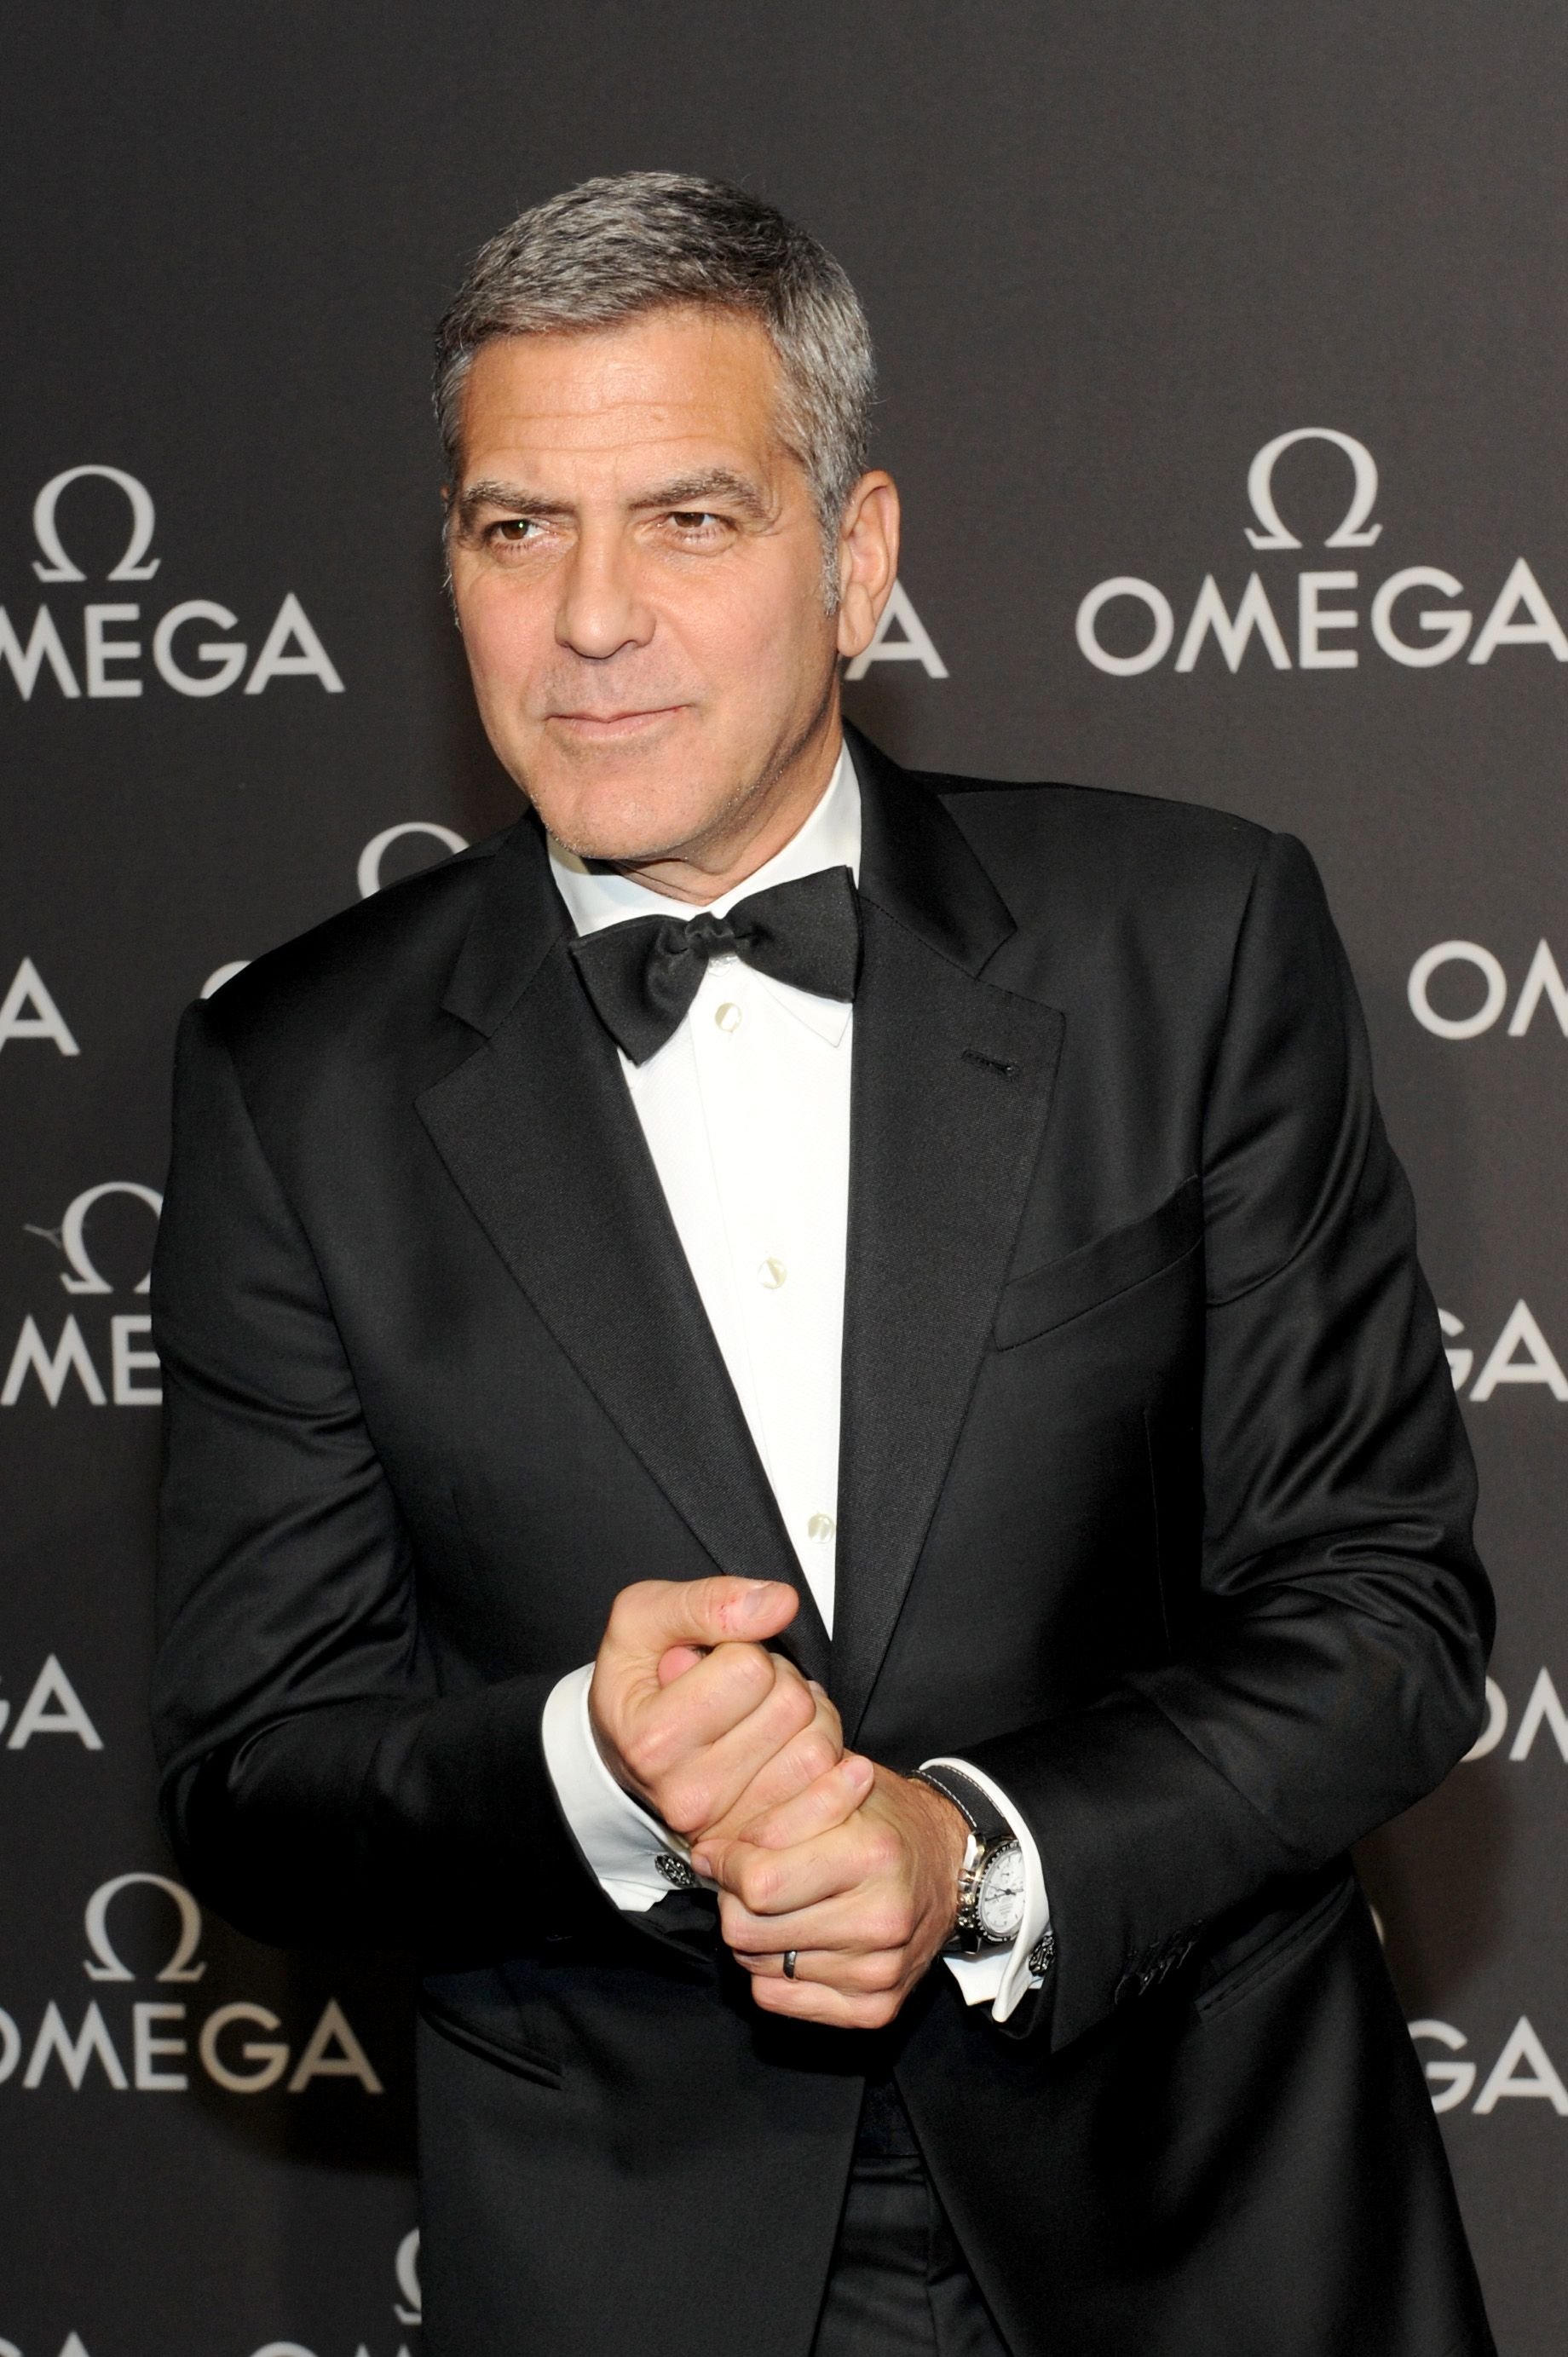 George Clooney at the Omega Speedmaster Houston Event on May 12, 2015, in Sugar Land, Texas | Photo: Craig Barritt/Getty Images